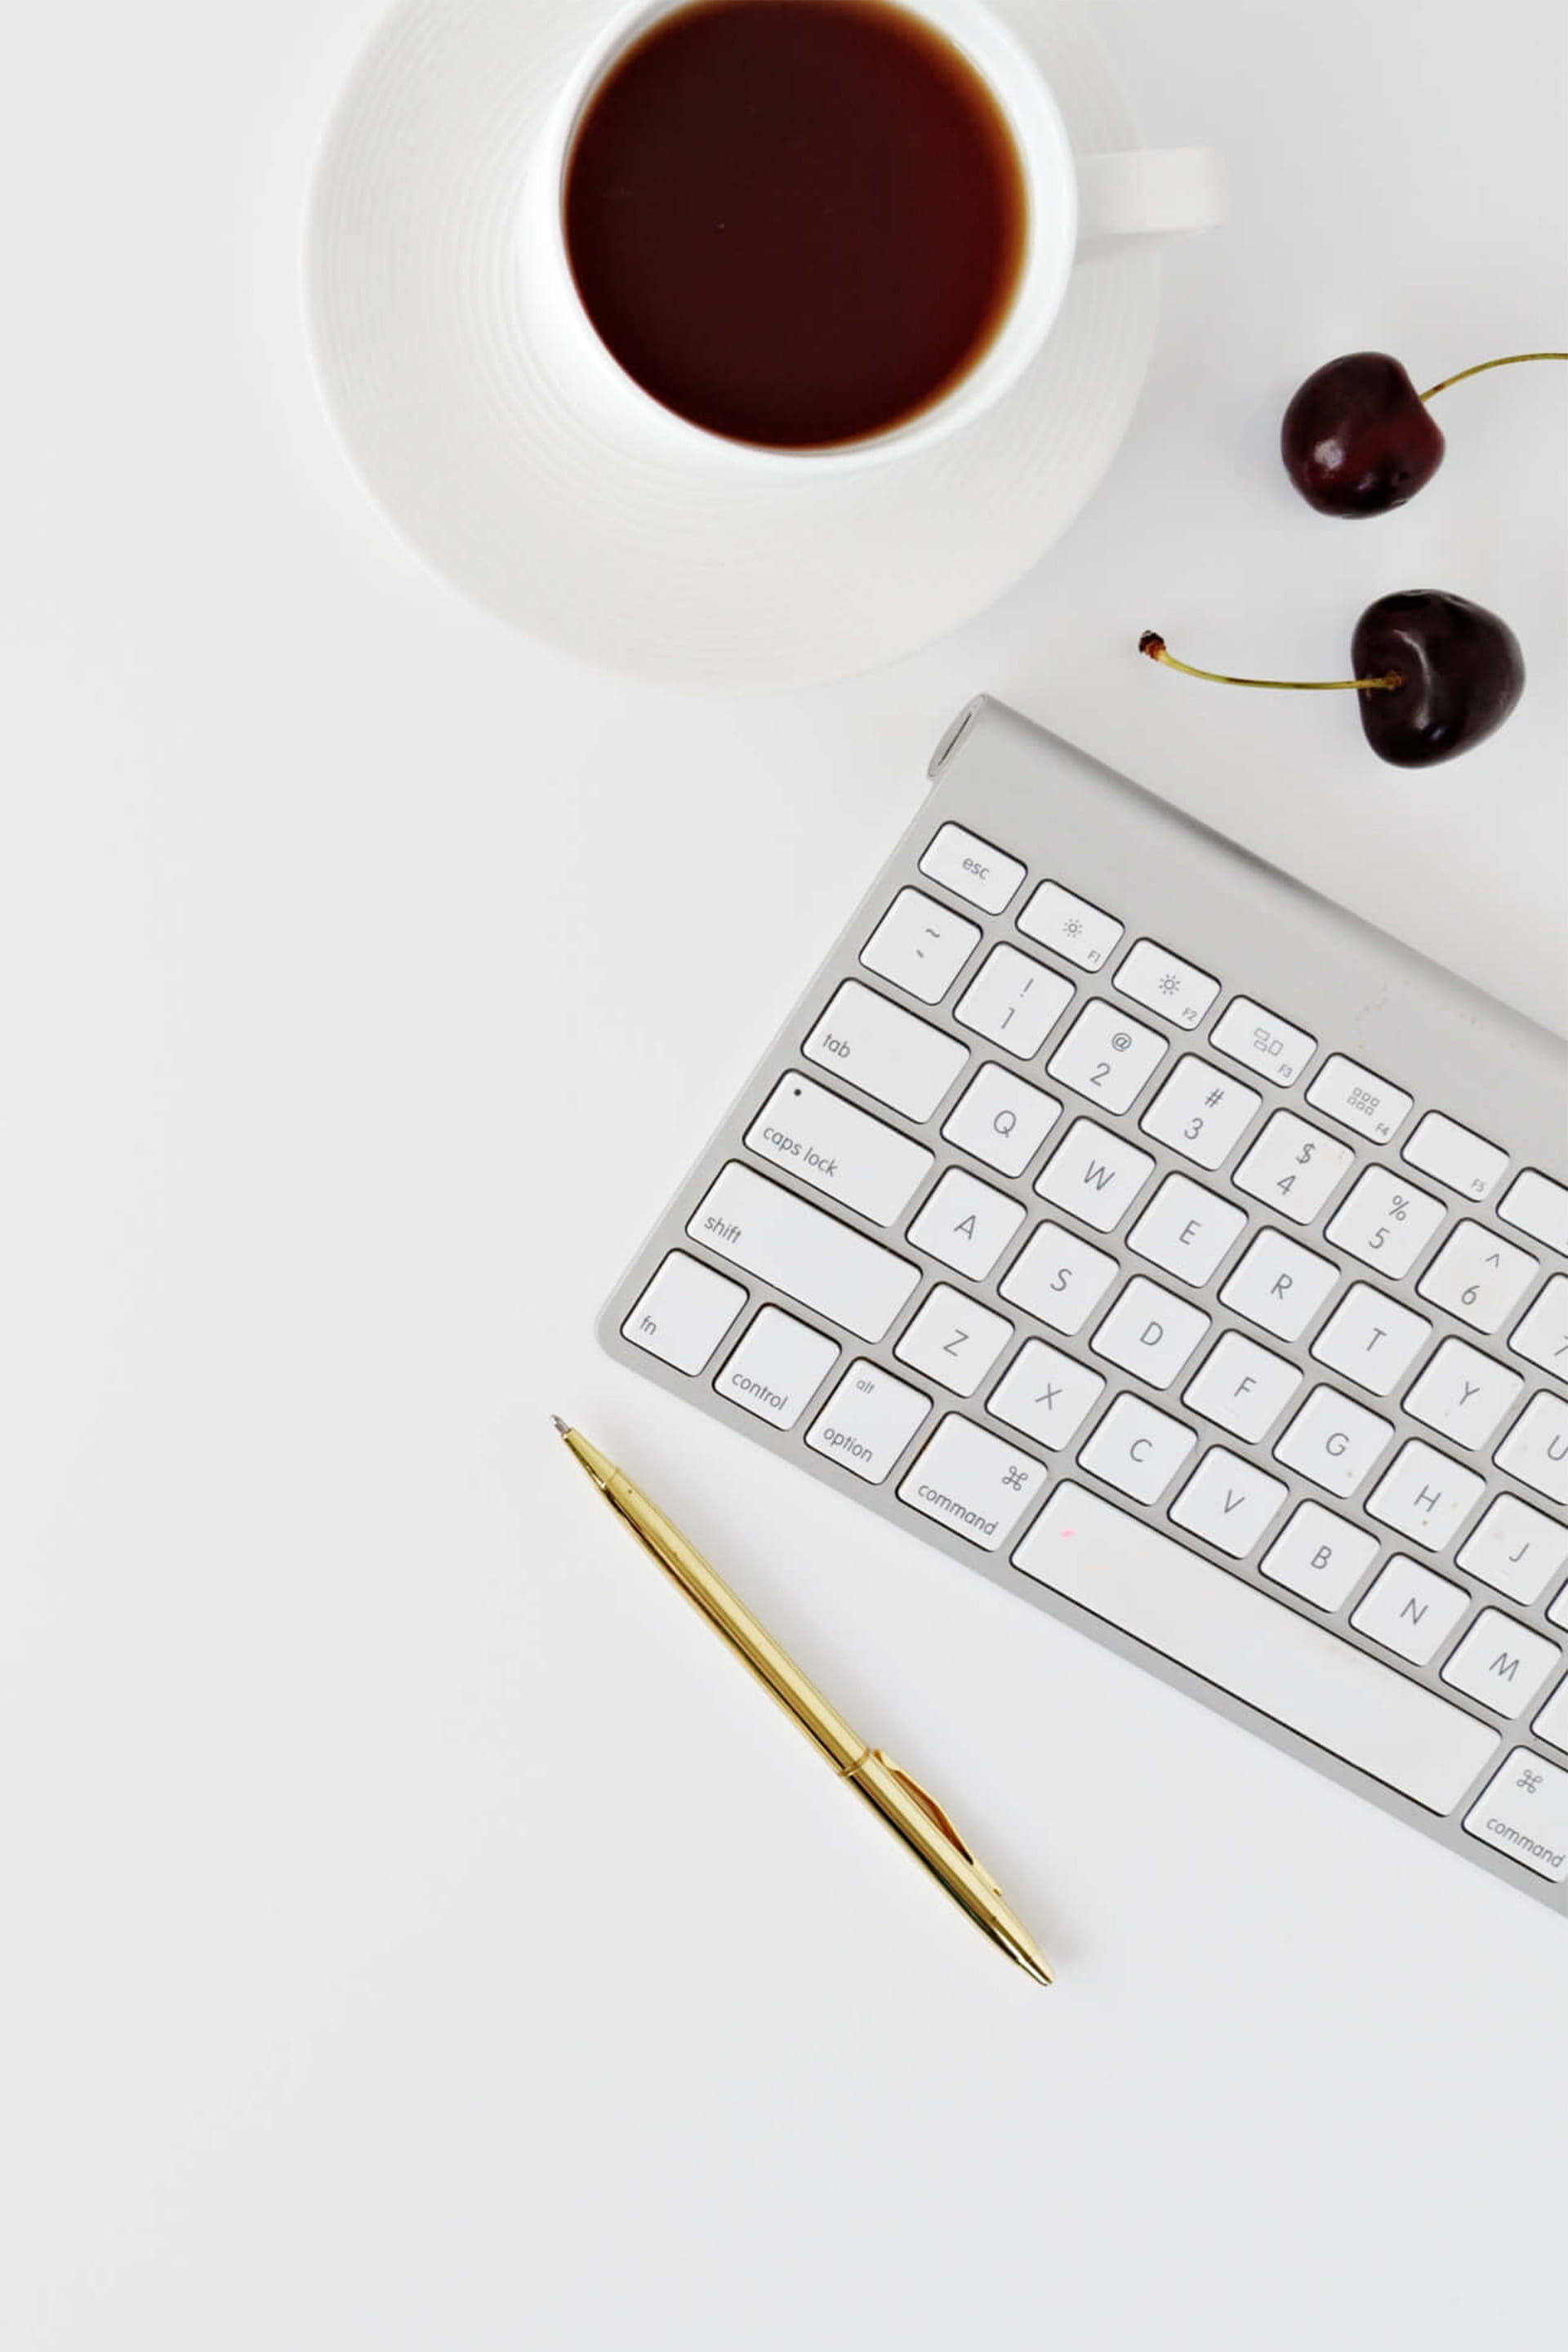 A keyboard, pen, coffee cup and two cherries on a white background